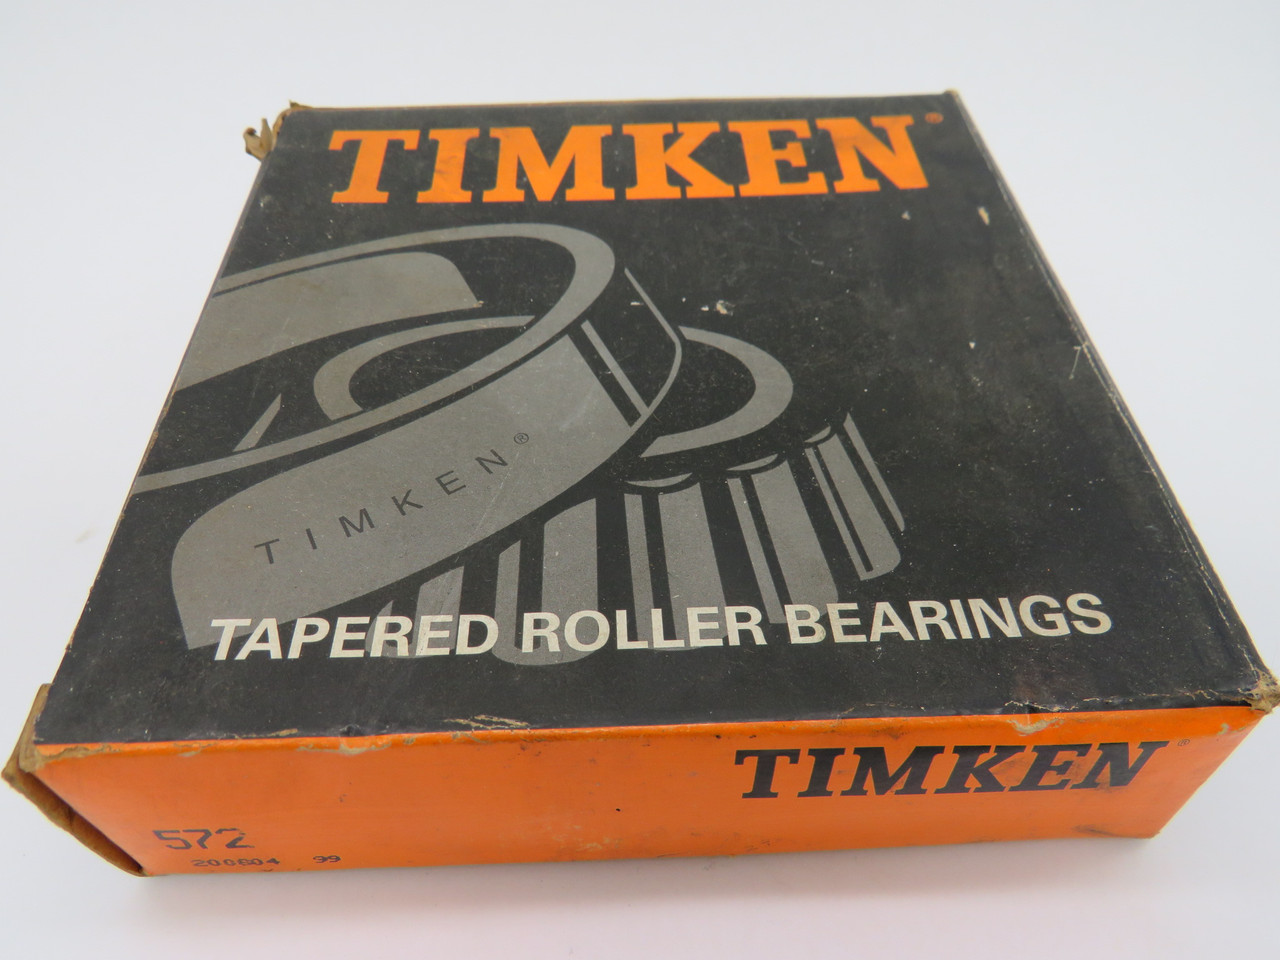 Timken 572 Tapered Roller Bearing Cup 5.5115"OD 1.125"W NEW